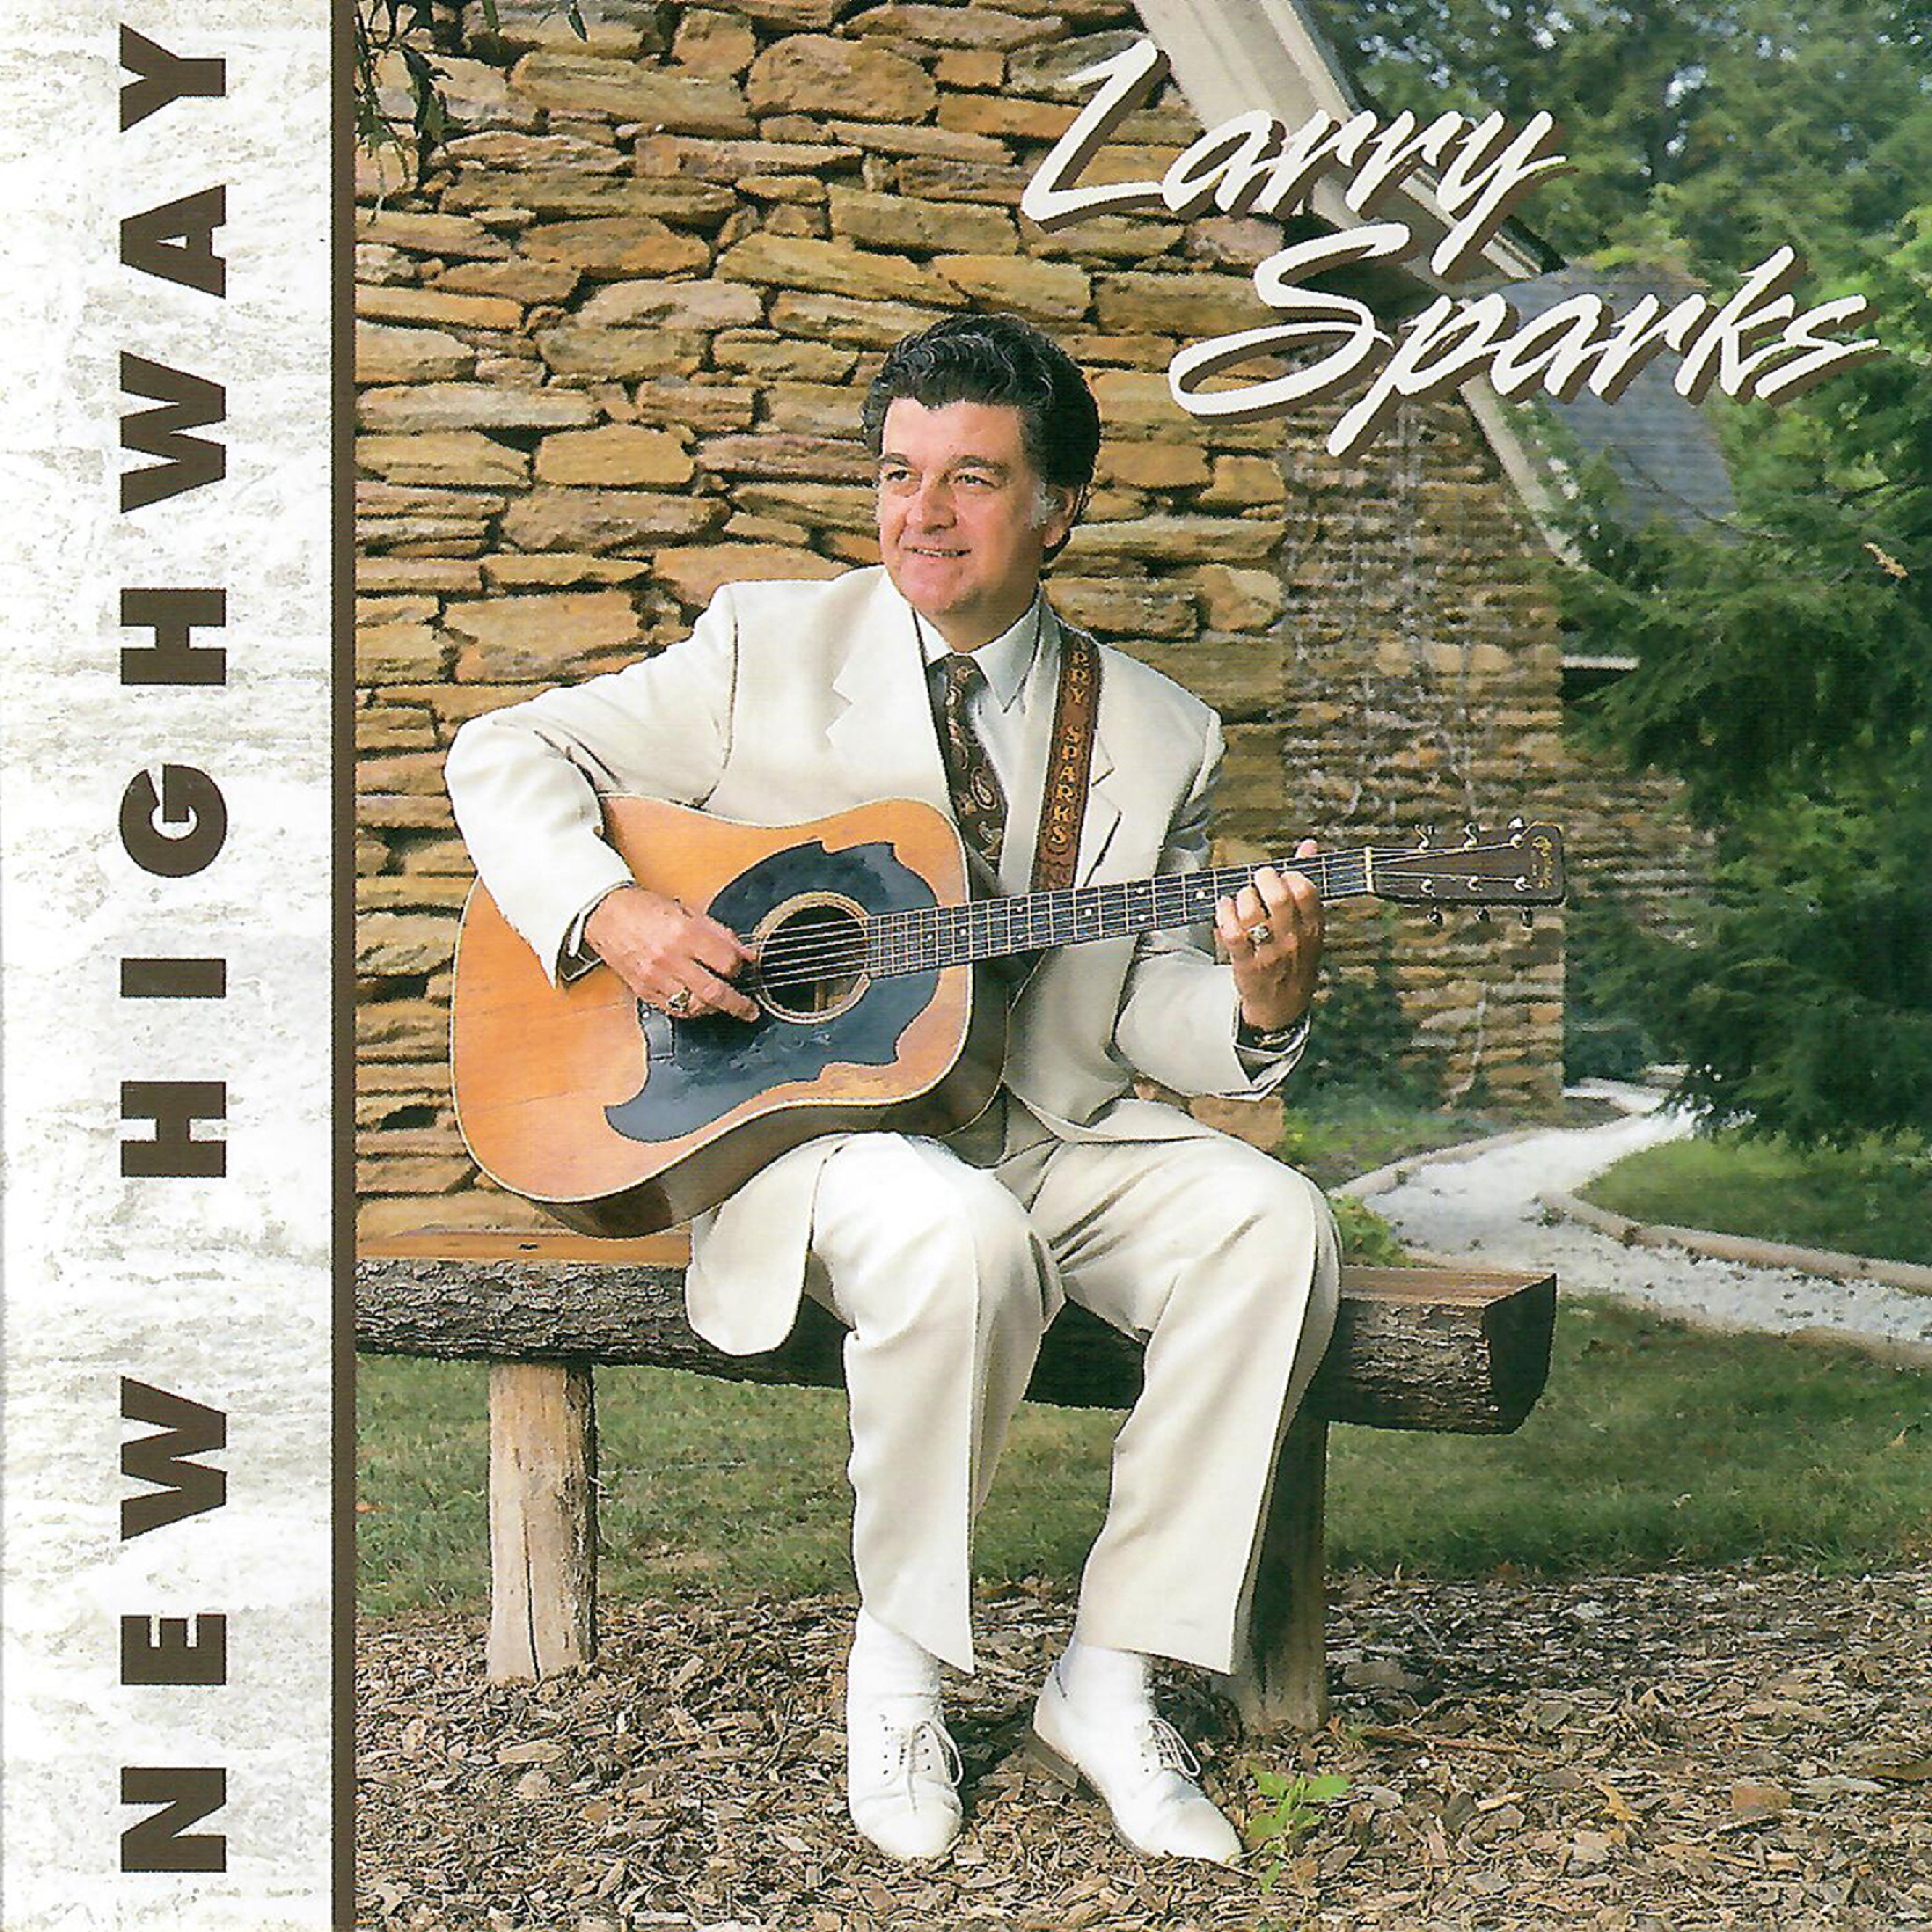 Remastered edition of Larry Sparks’ New Highway out now on digital platforms